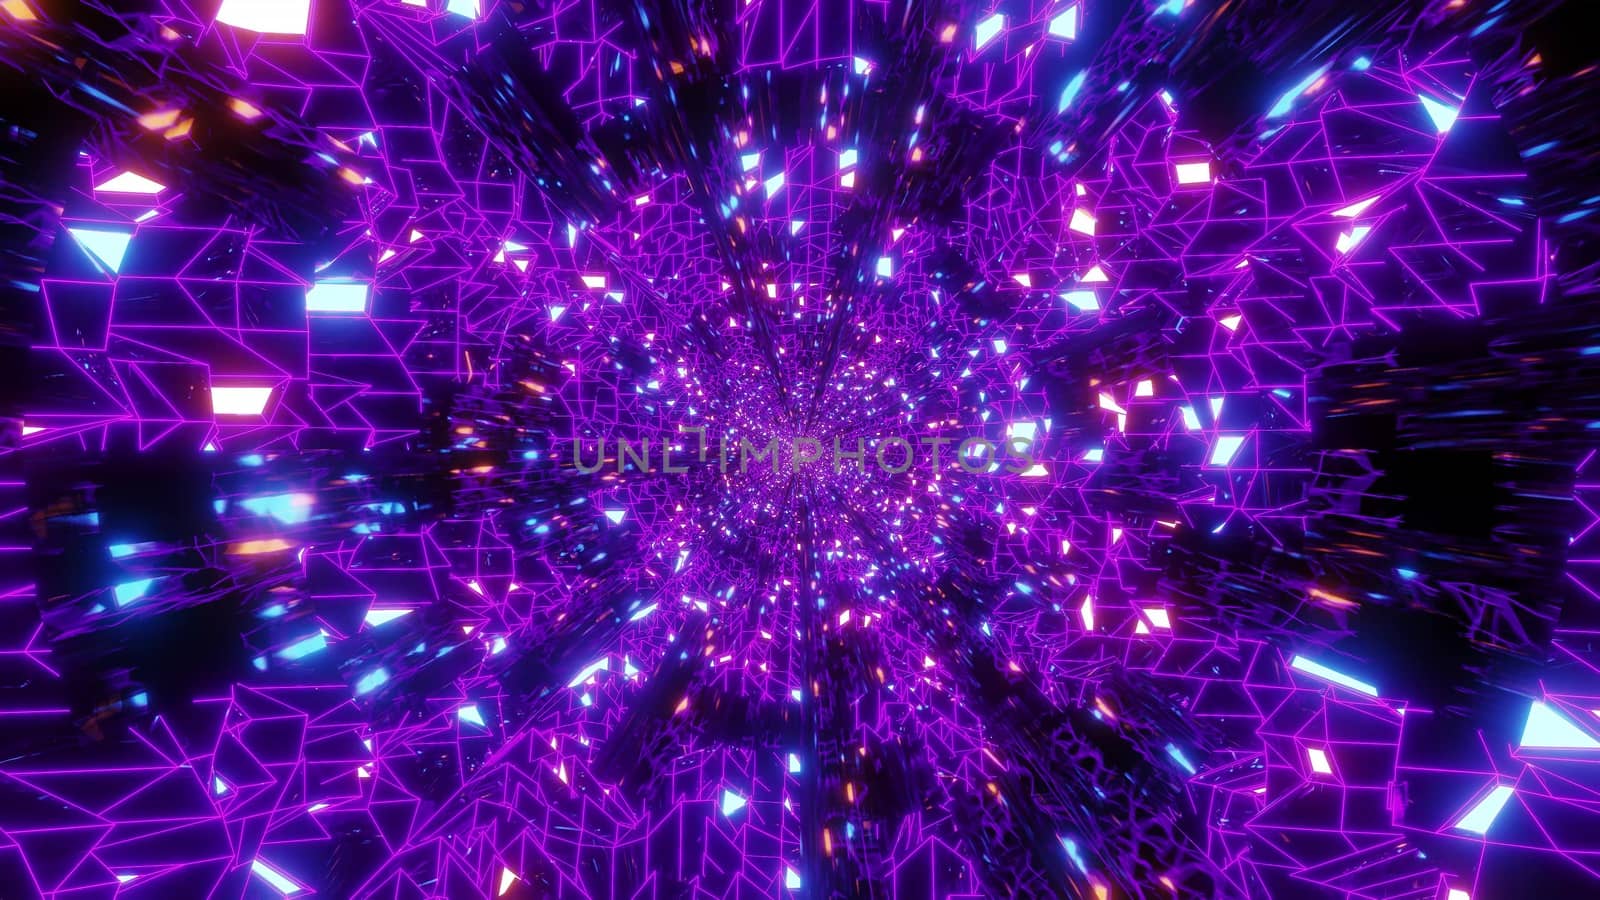 abstract wireframe design space galaxy 3d illustration wallpaper background, glowing wireframe and reflecions 3d rendering art